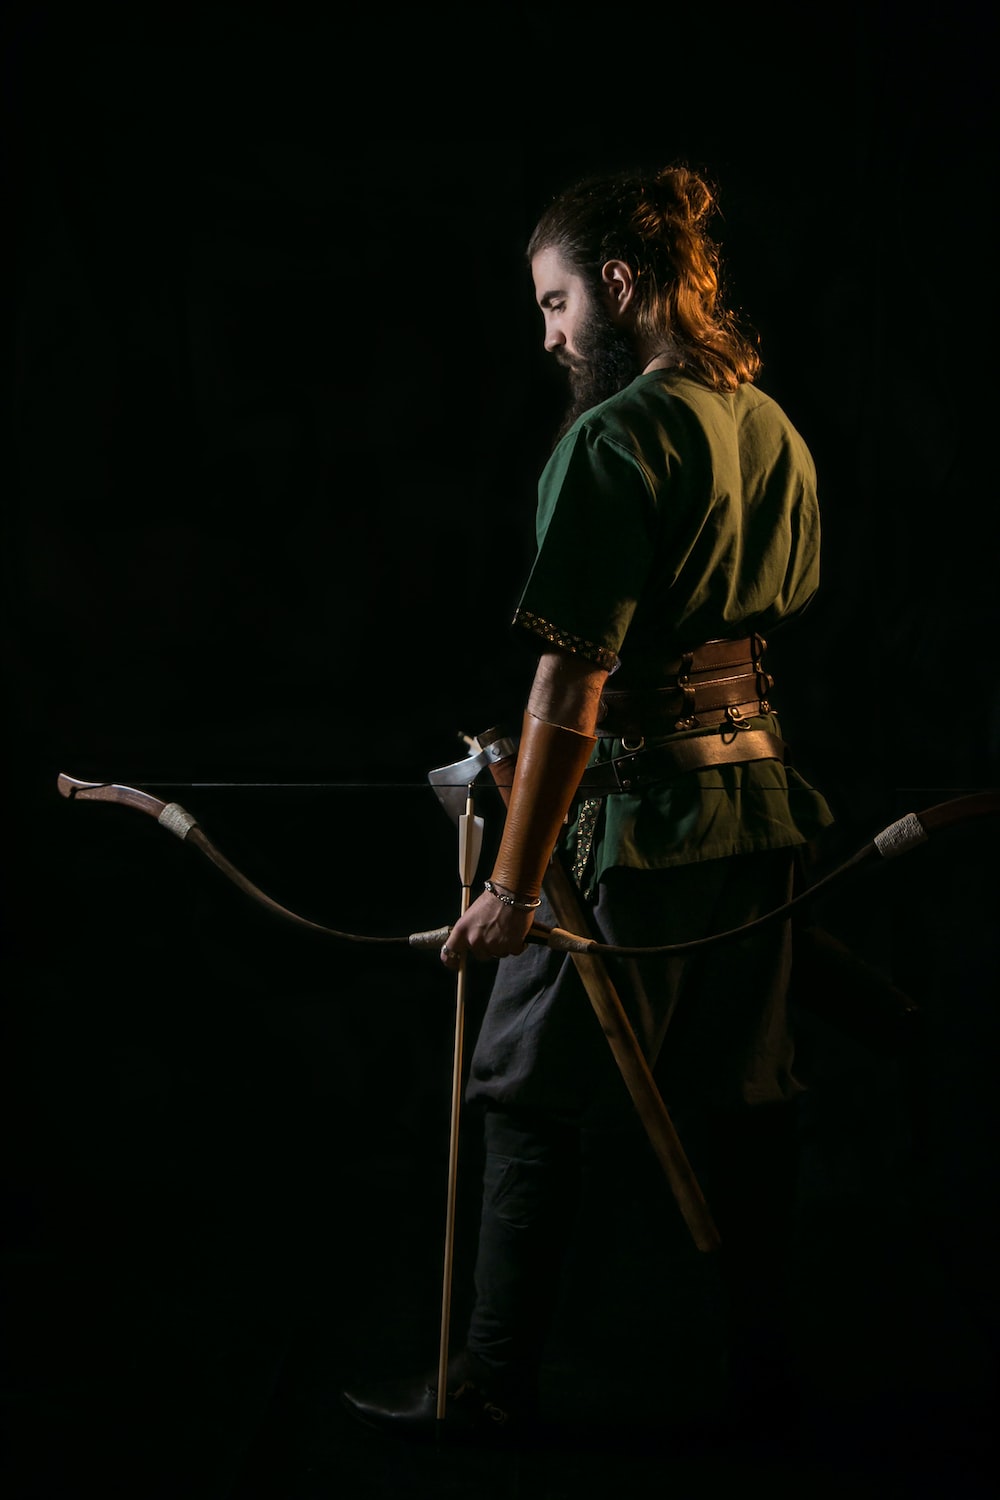 Best bow and arrow pictures hd download free images on